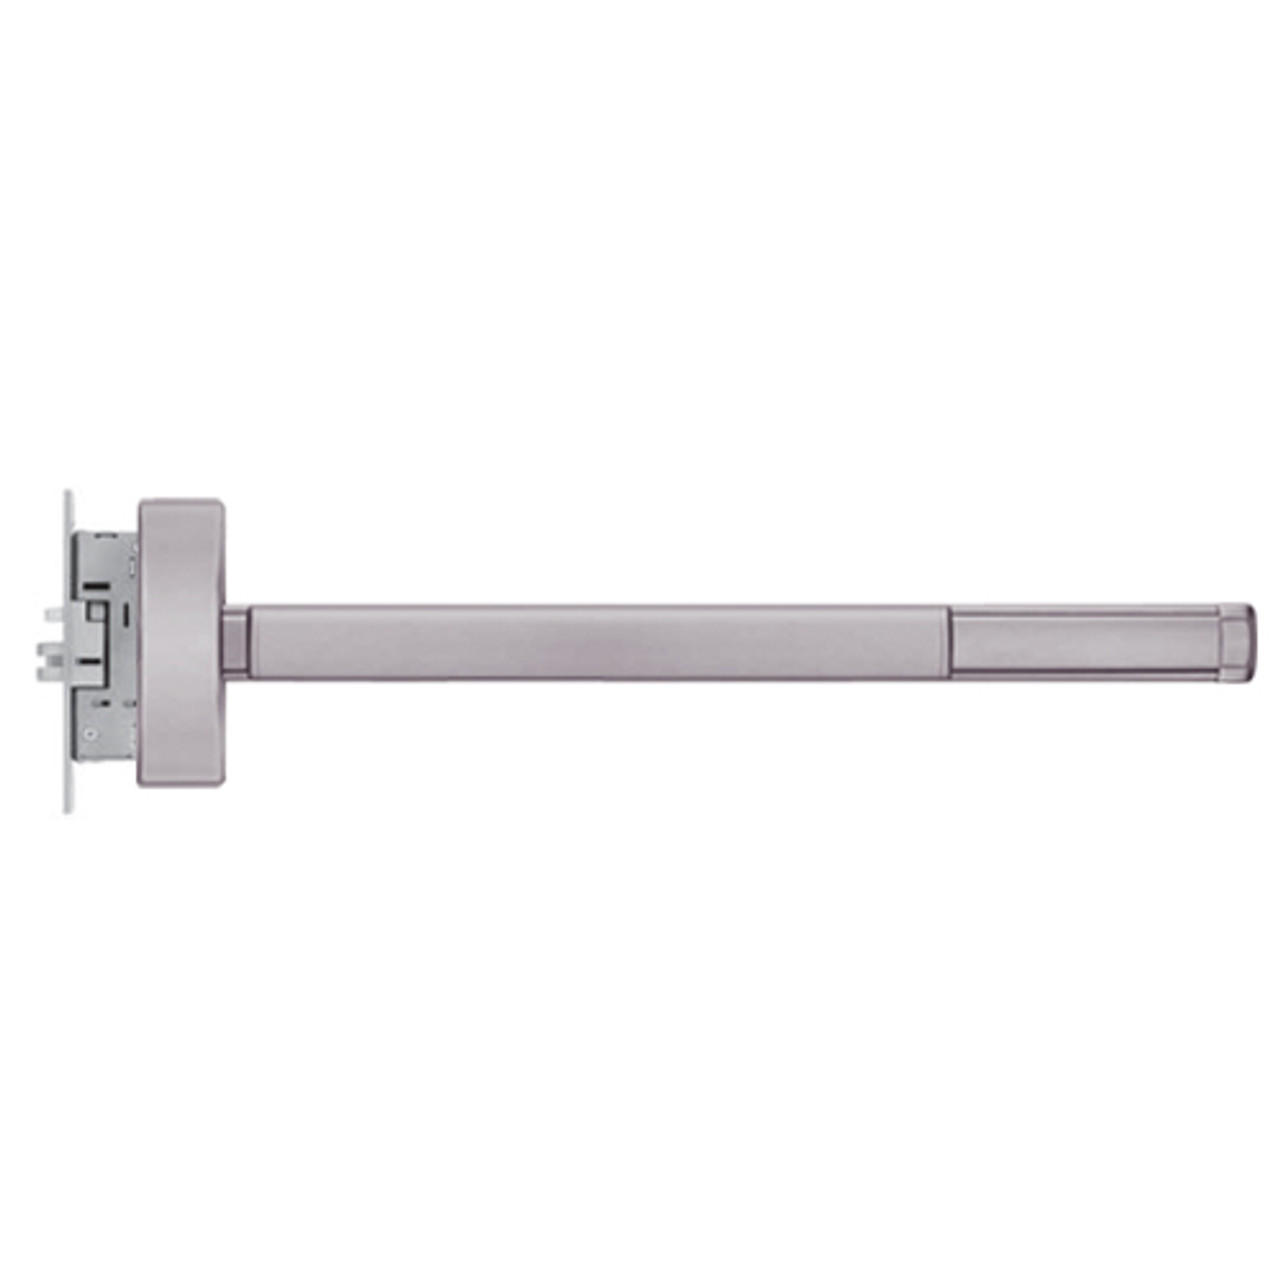 ELR2315-LHR-630-36 PHI 2300 Series Apex Mortise Exit Device with Electric Latch Retraction Prepped for Thumb Piece Always Active in Satin Stainless Steel Finish